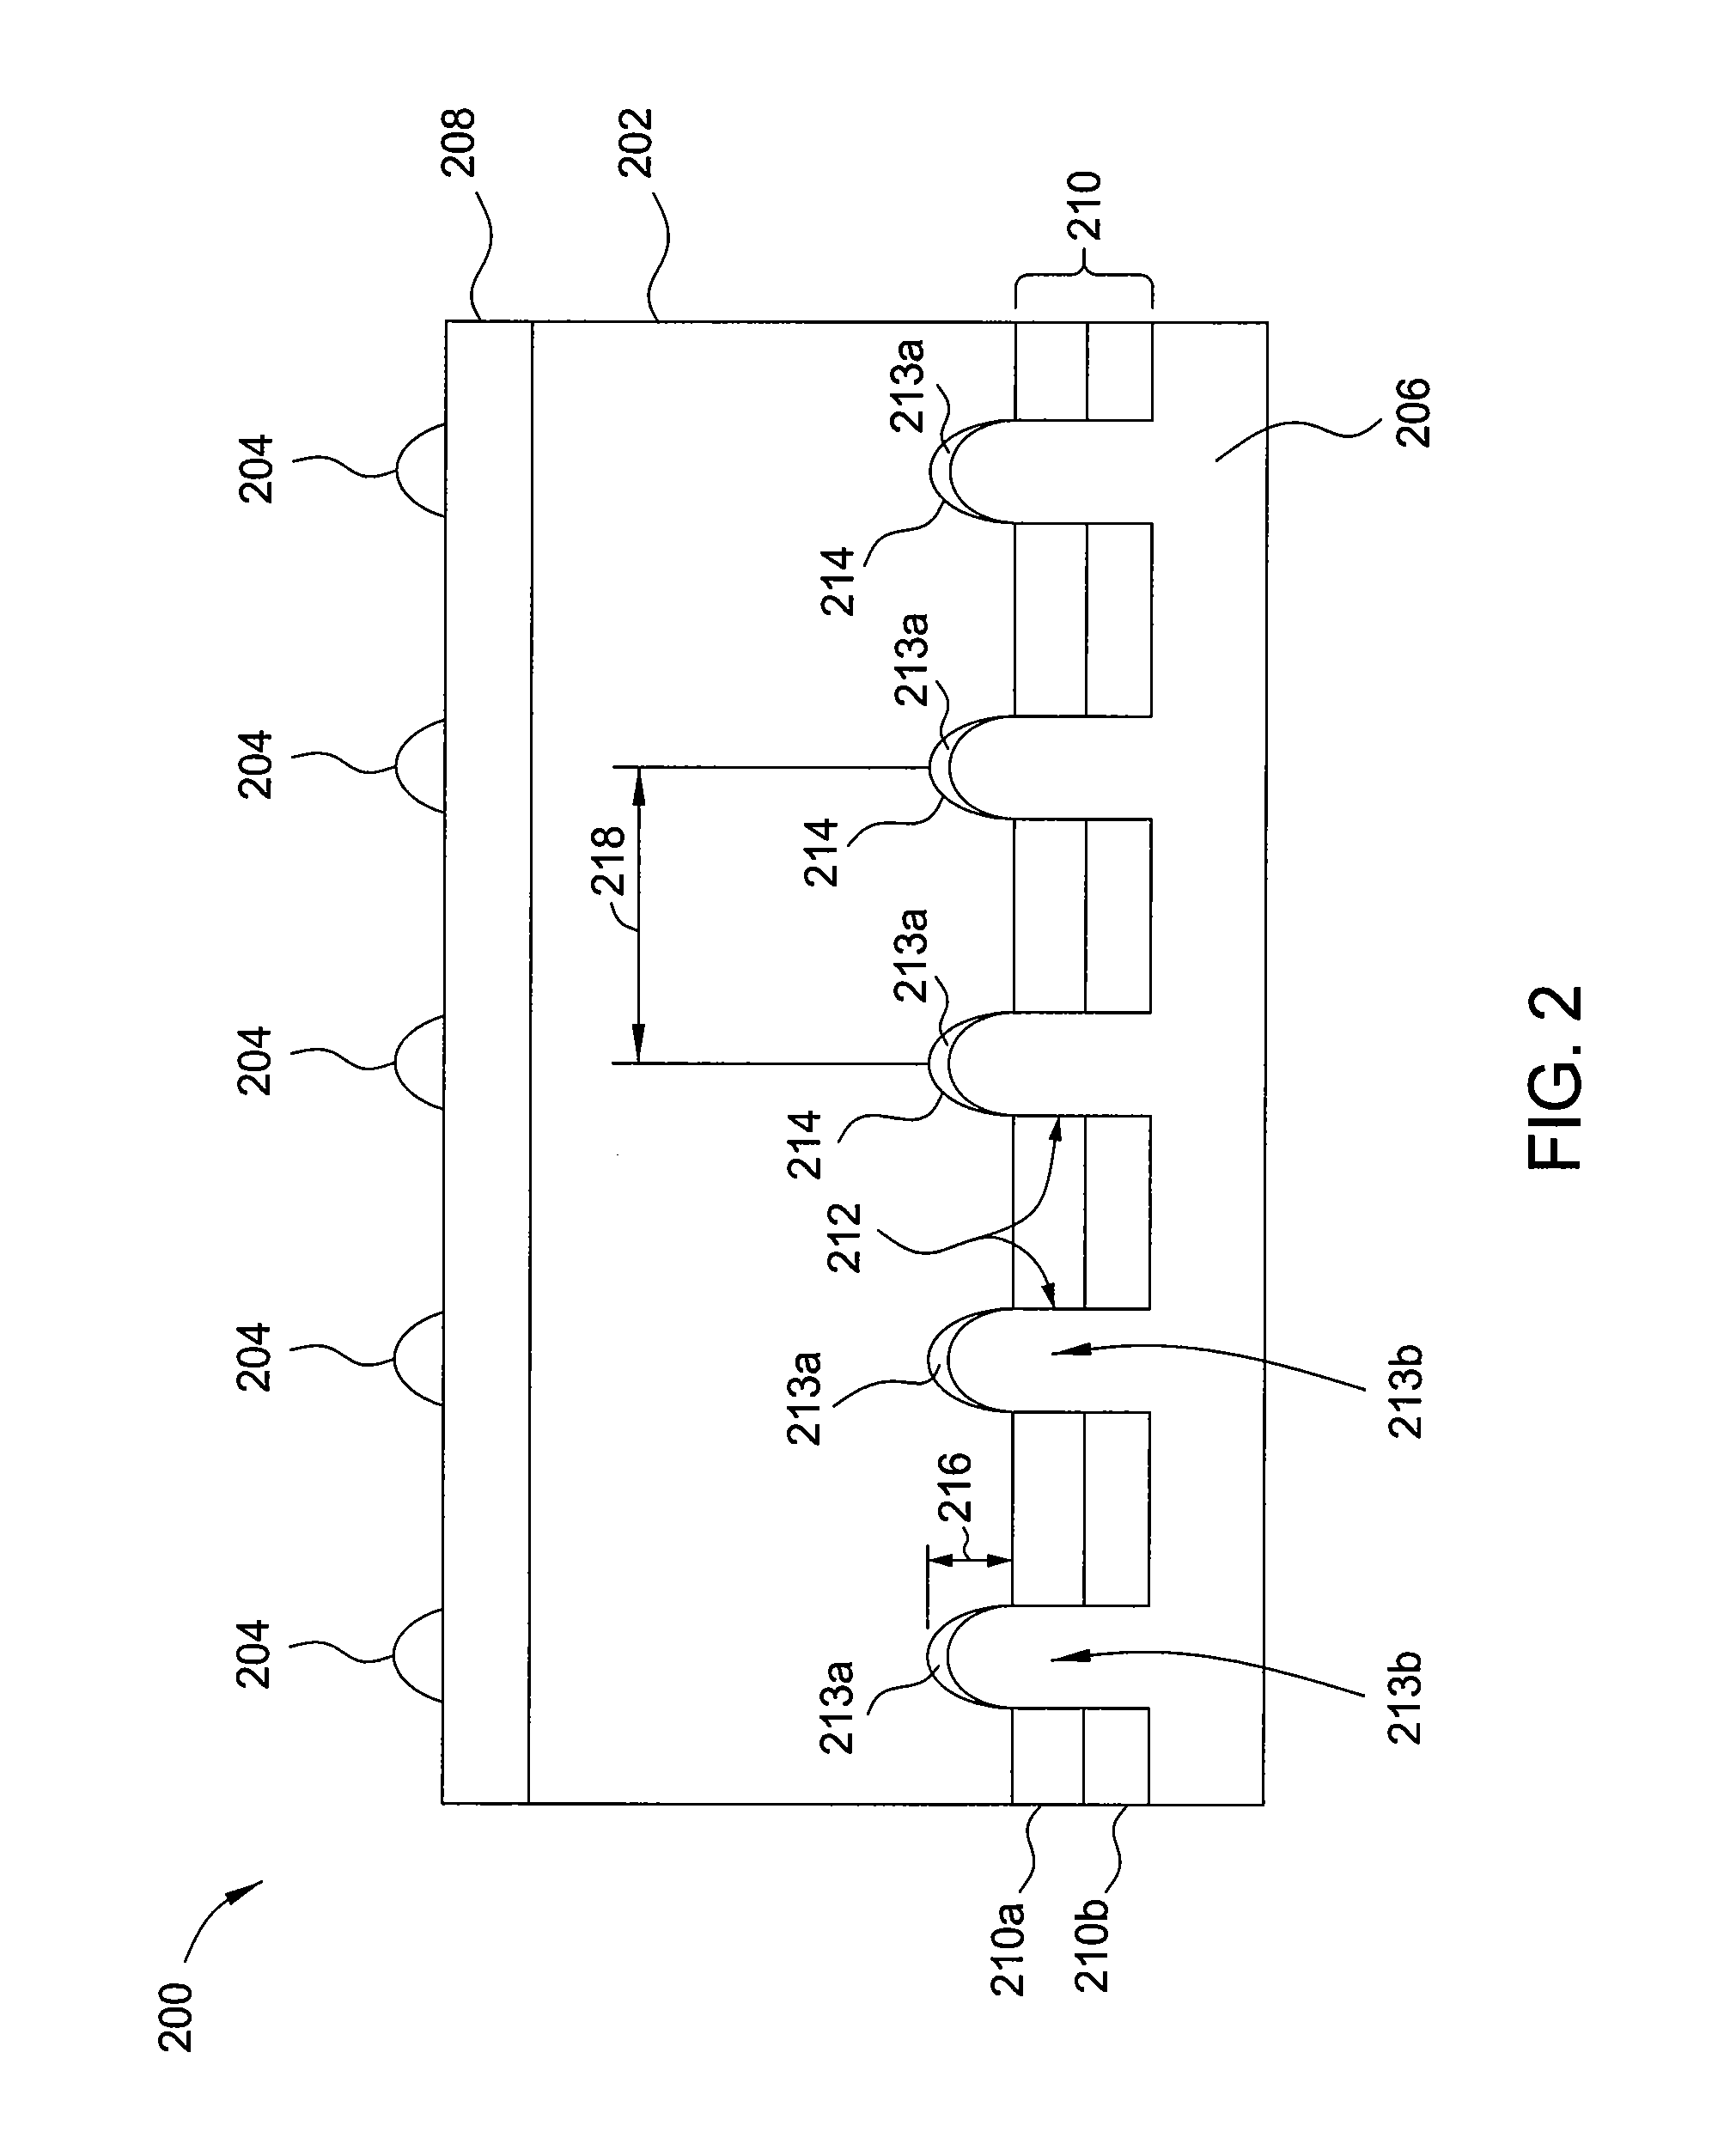 Doped ai paste for local alloyed junction formation with low contact resistance